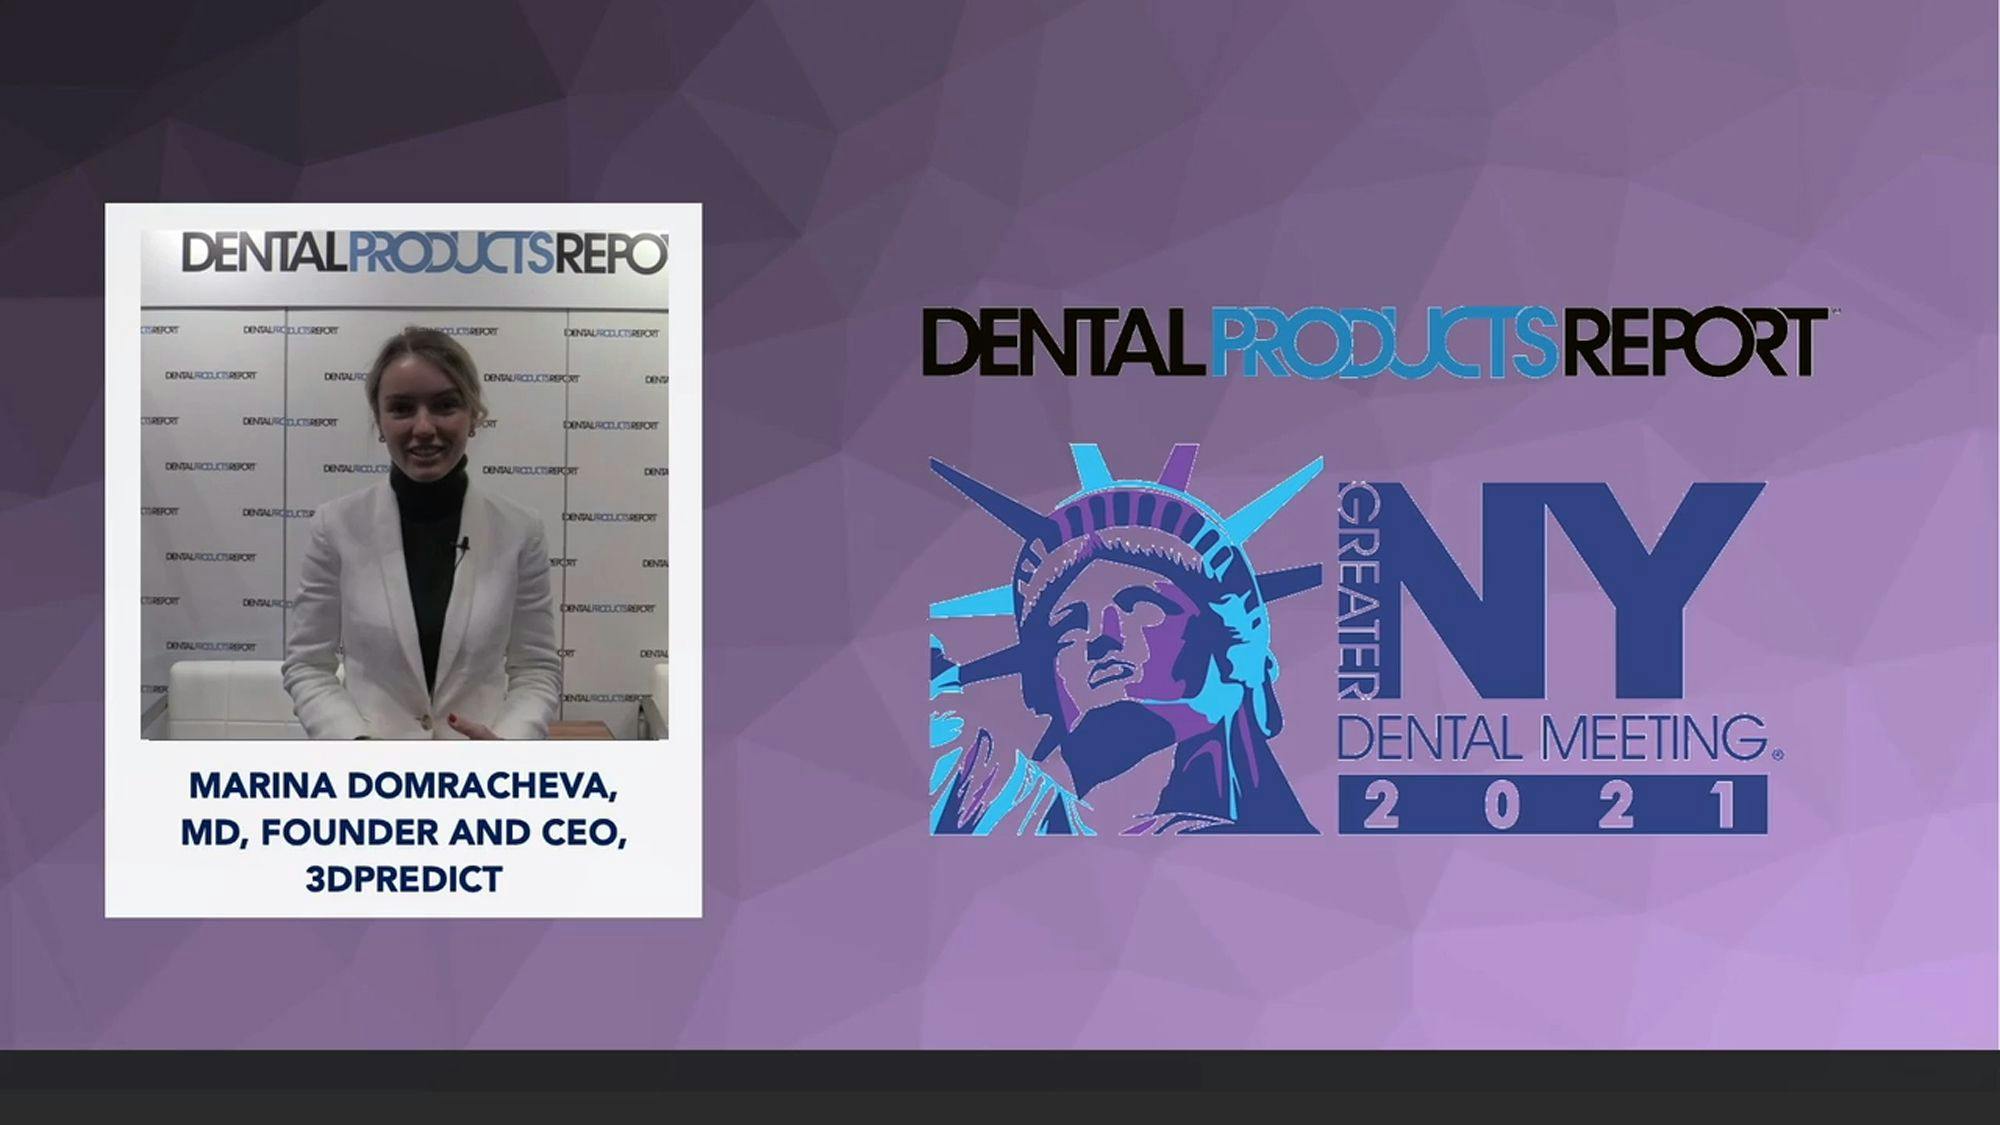 Greater New York Dental Meeting 2021, Interview with Dr Marina Domracheva, Founder and CEO 3DPredict